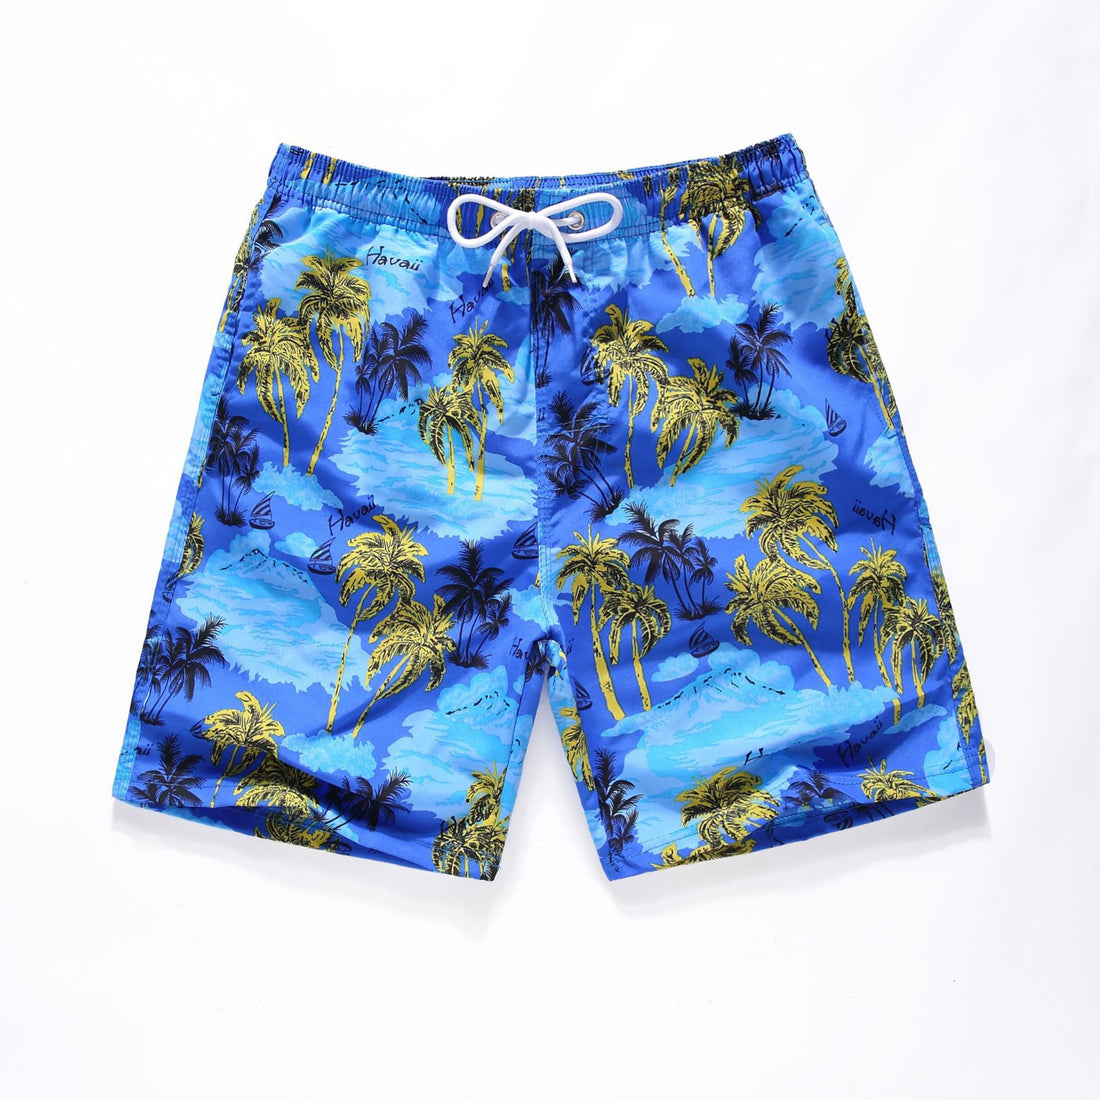 European And American Swimming Trunks Printed Amazon Large Casual